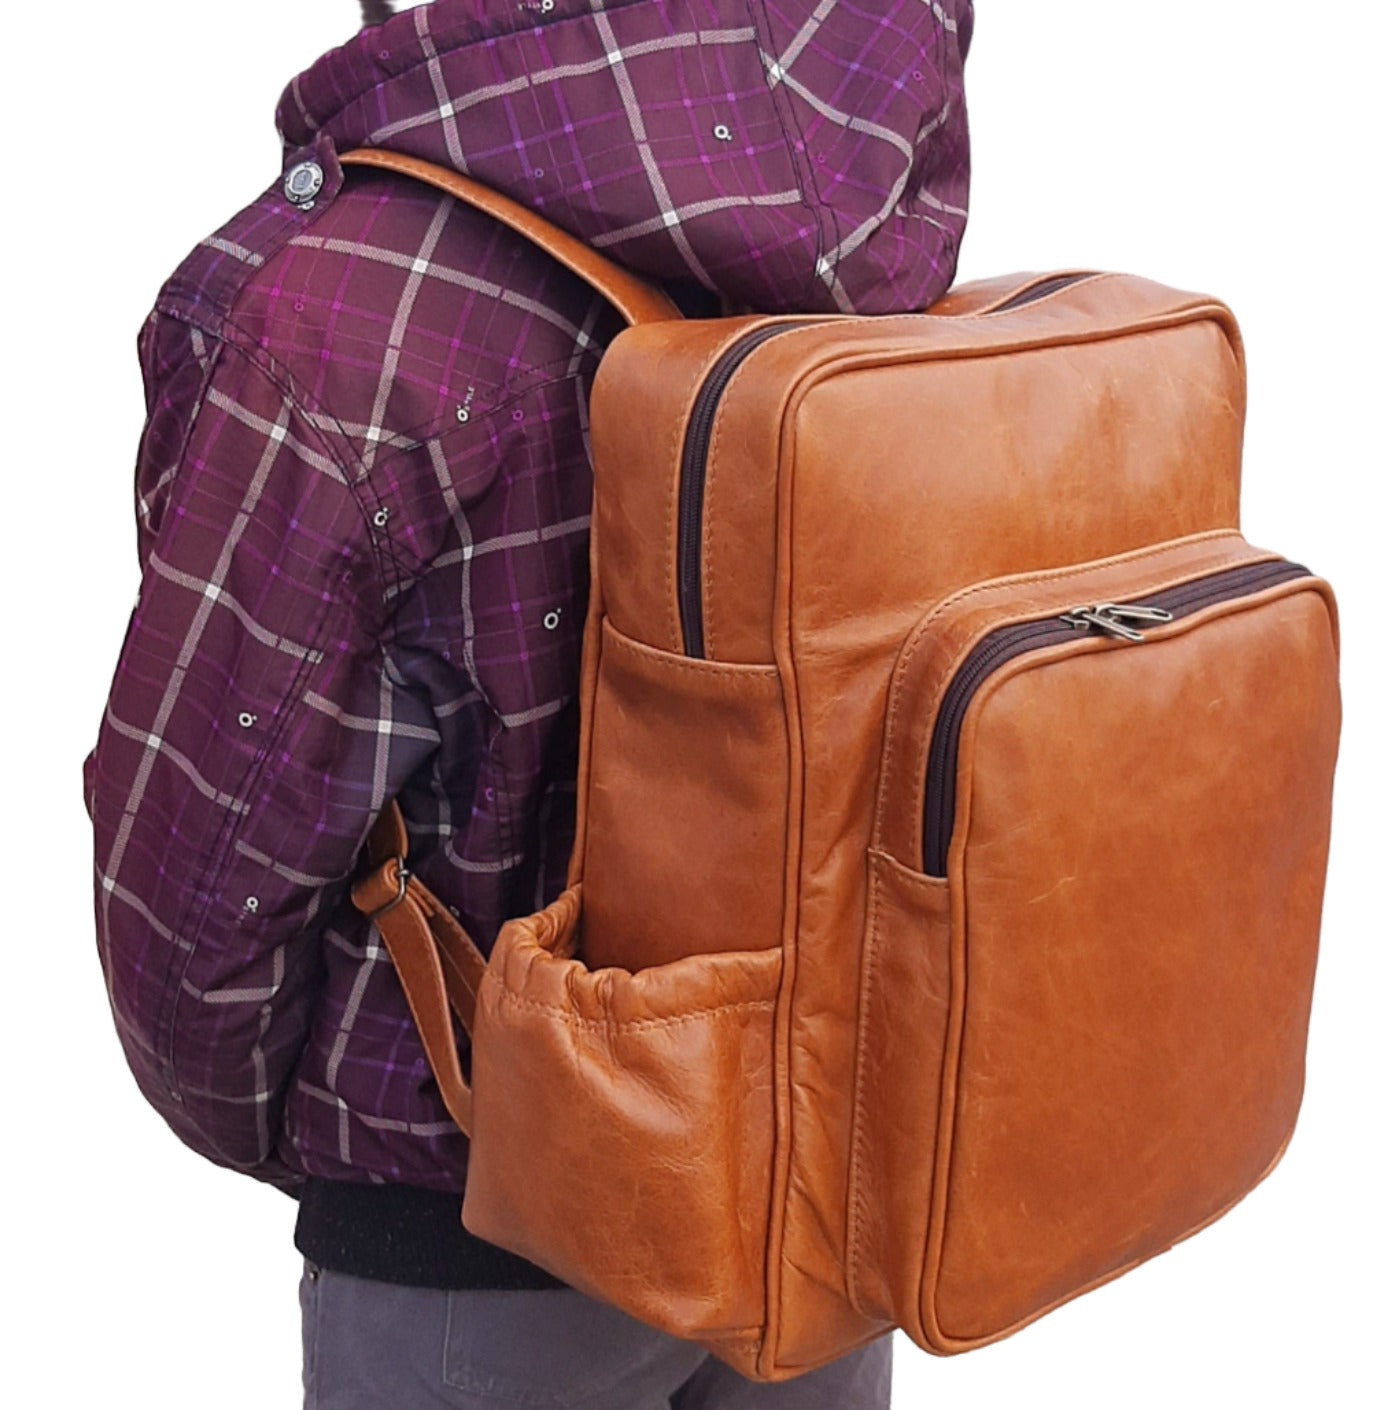 A boy carrying Everyday Leather Backpacks XL in light tan colour from Cape Masai Leather 